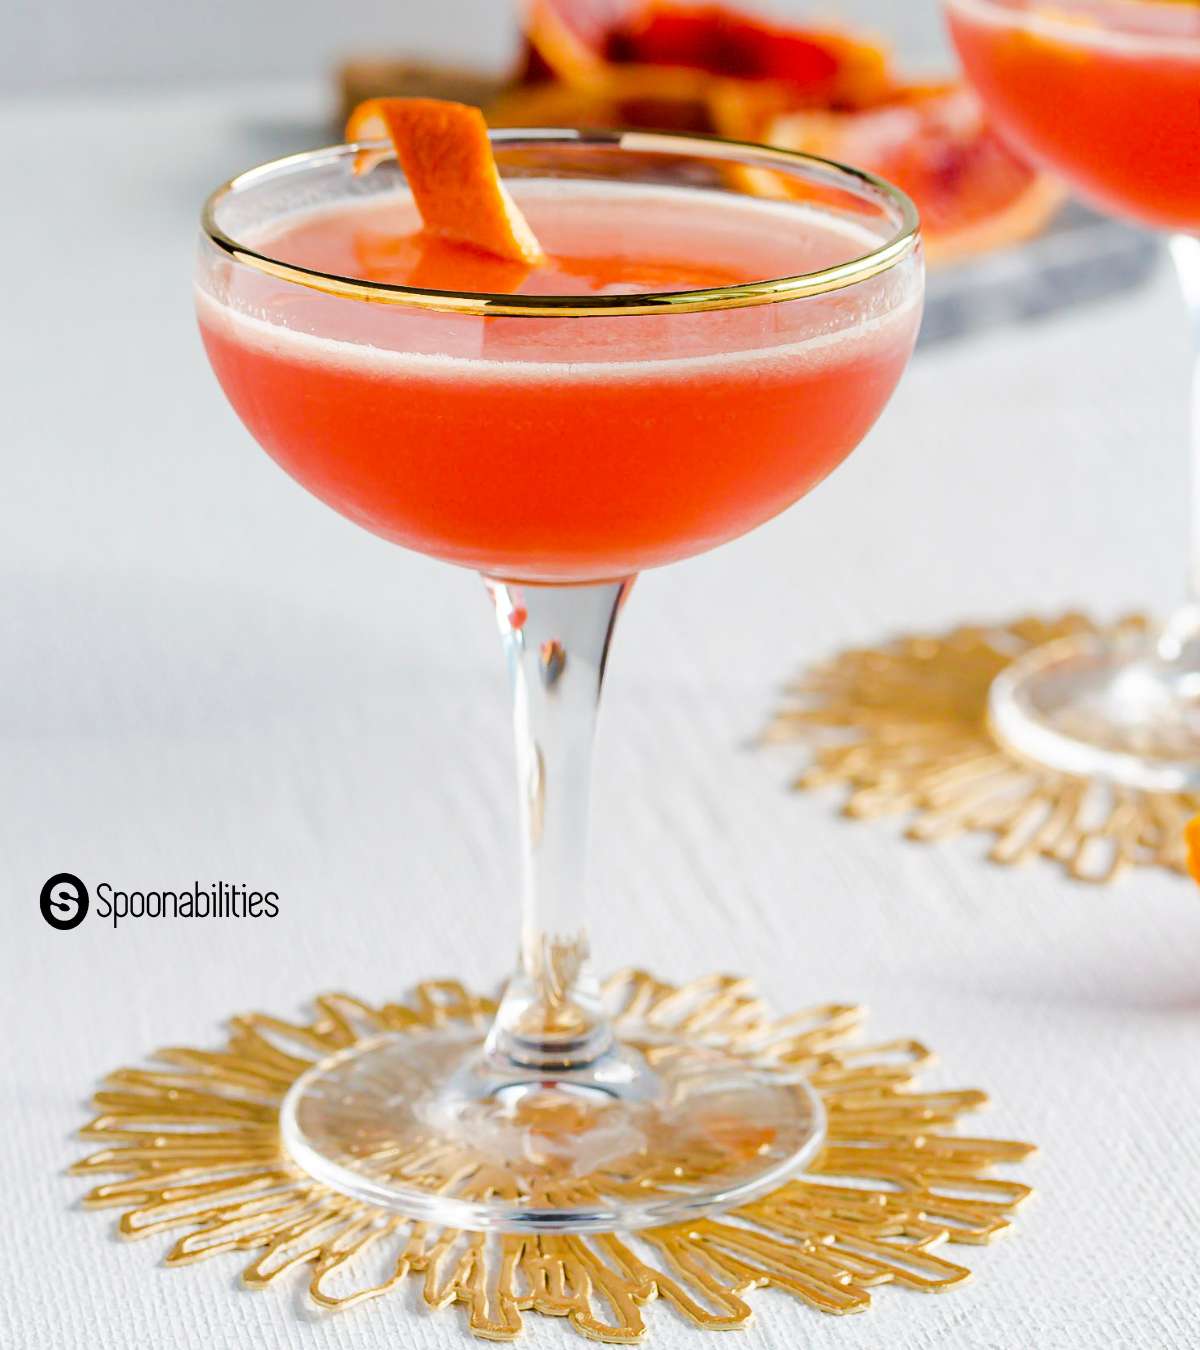 Solerno cocktail in a glass with gold trimming in the rim and orange zest as garnish